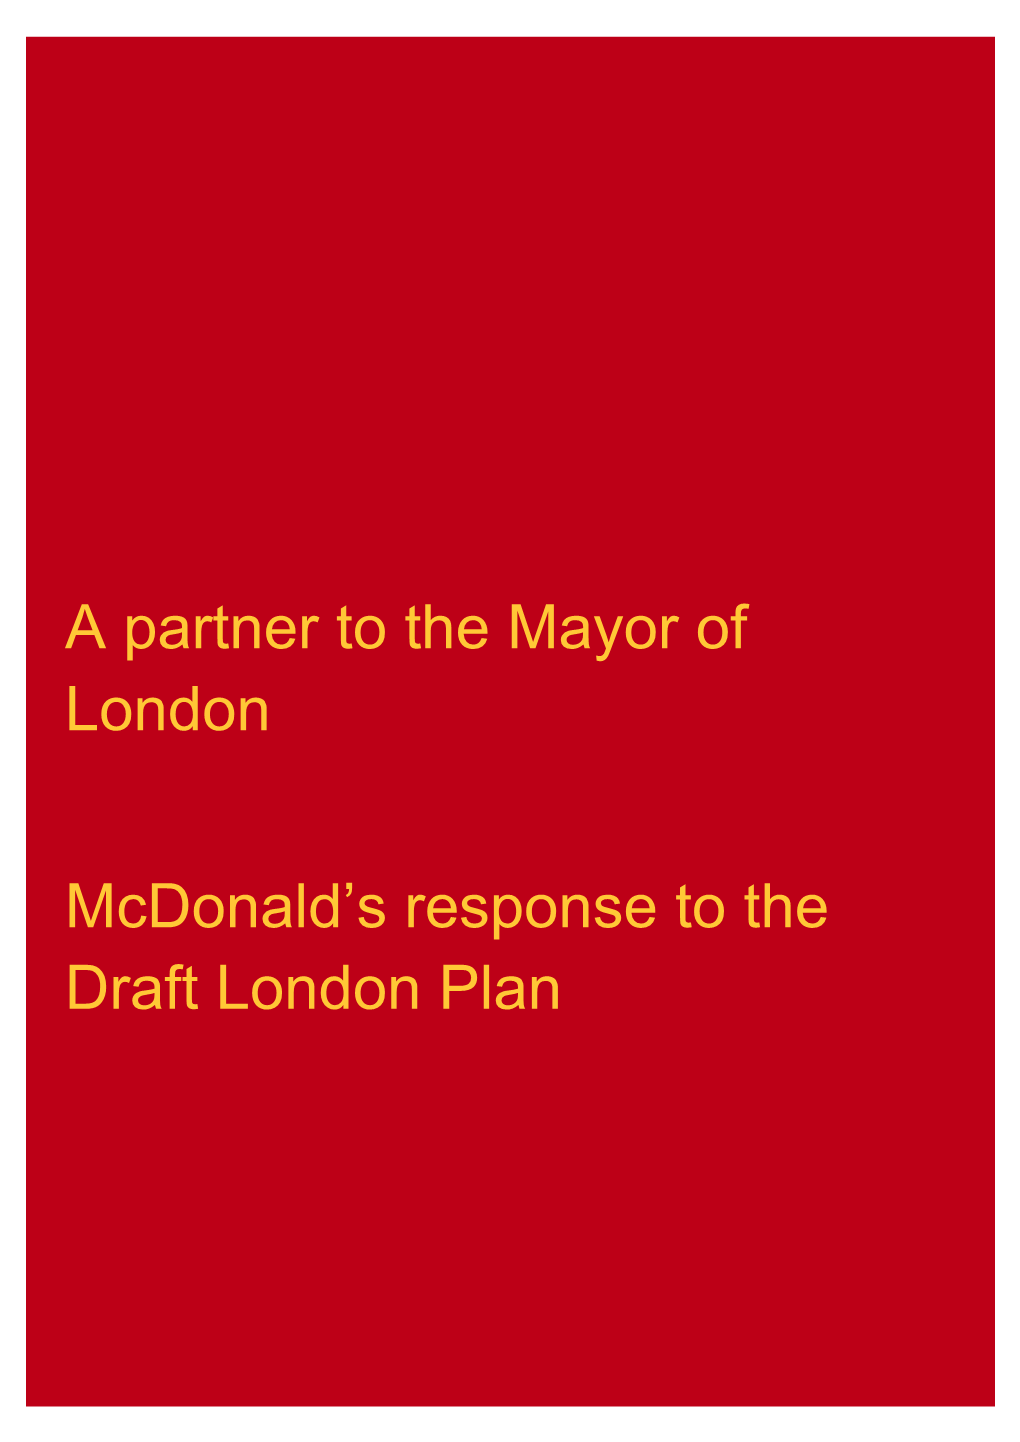 A Partner to the Mayor of London Mcdonald's Response to the Draft